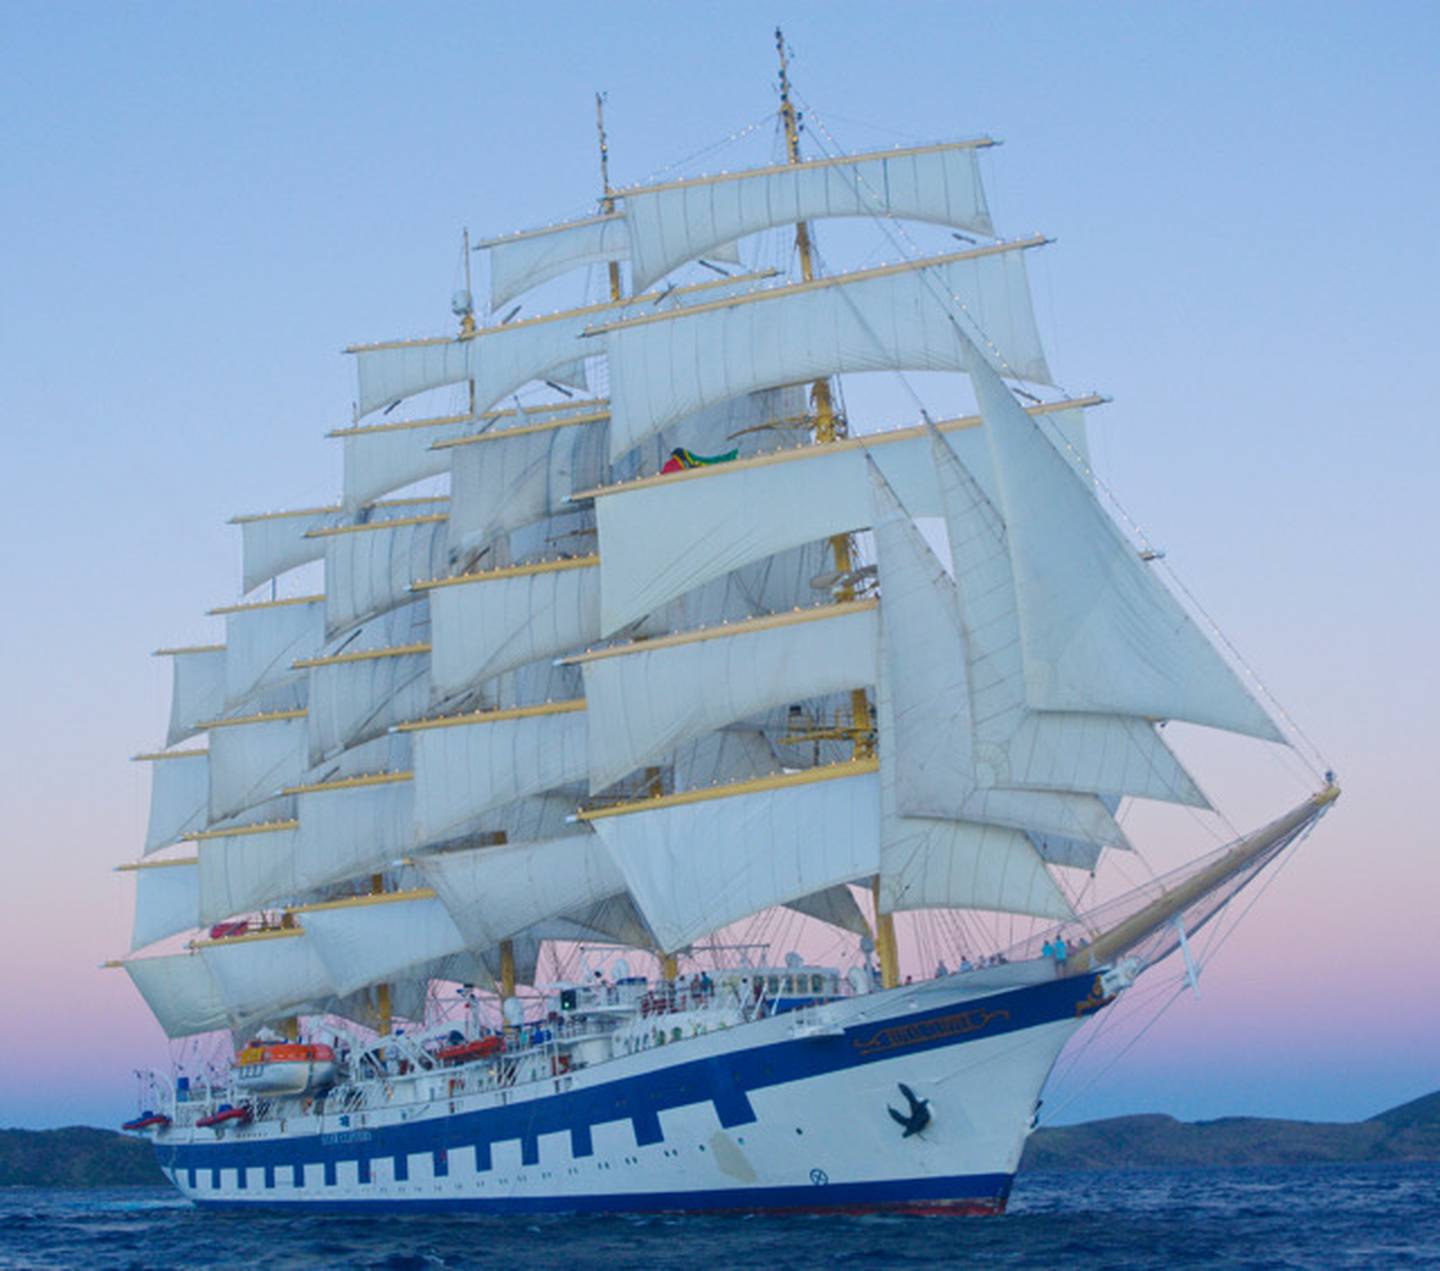 The Royal Clipper, the largest ship in the Star Clipper fleet